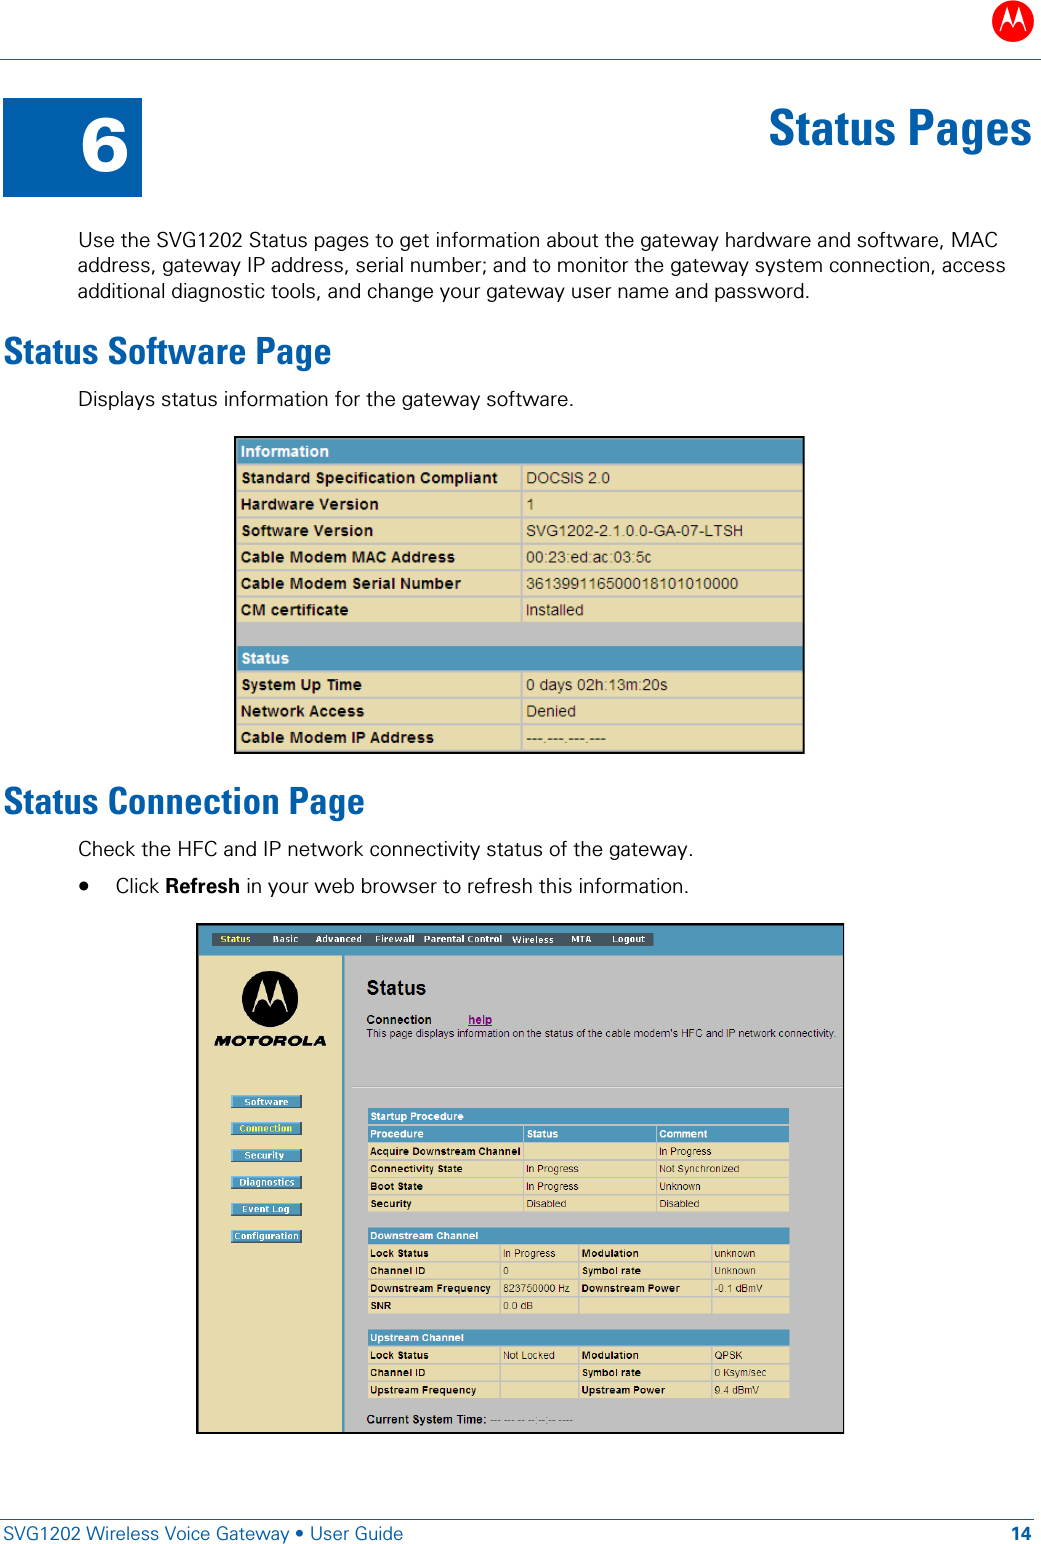 B   SVG1202 Wireless Voice Gateway • User Guide 14  6 Status Pages  Use the SVG1202 Status pages to get information about the gateway hardware and software, MAC address, gateway IP address, serial number; and to monitor the gateway system connection, access additional diagnostic tools, and change your gateway user name and password. Status Software Page Displays status information for the gateway software.  Status Connection Page Check the HFC and IP network connectivity status of the gateway.  • Click Refresh in your web browser to refresh this information.  